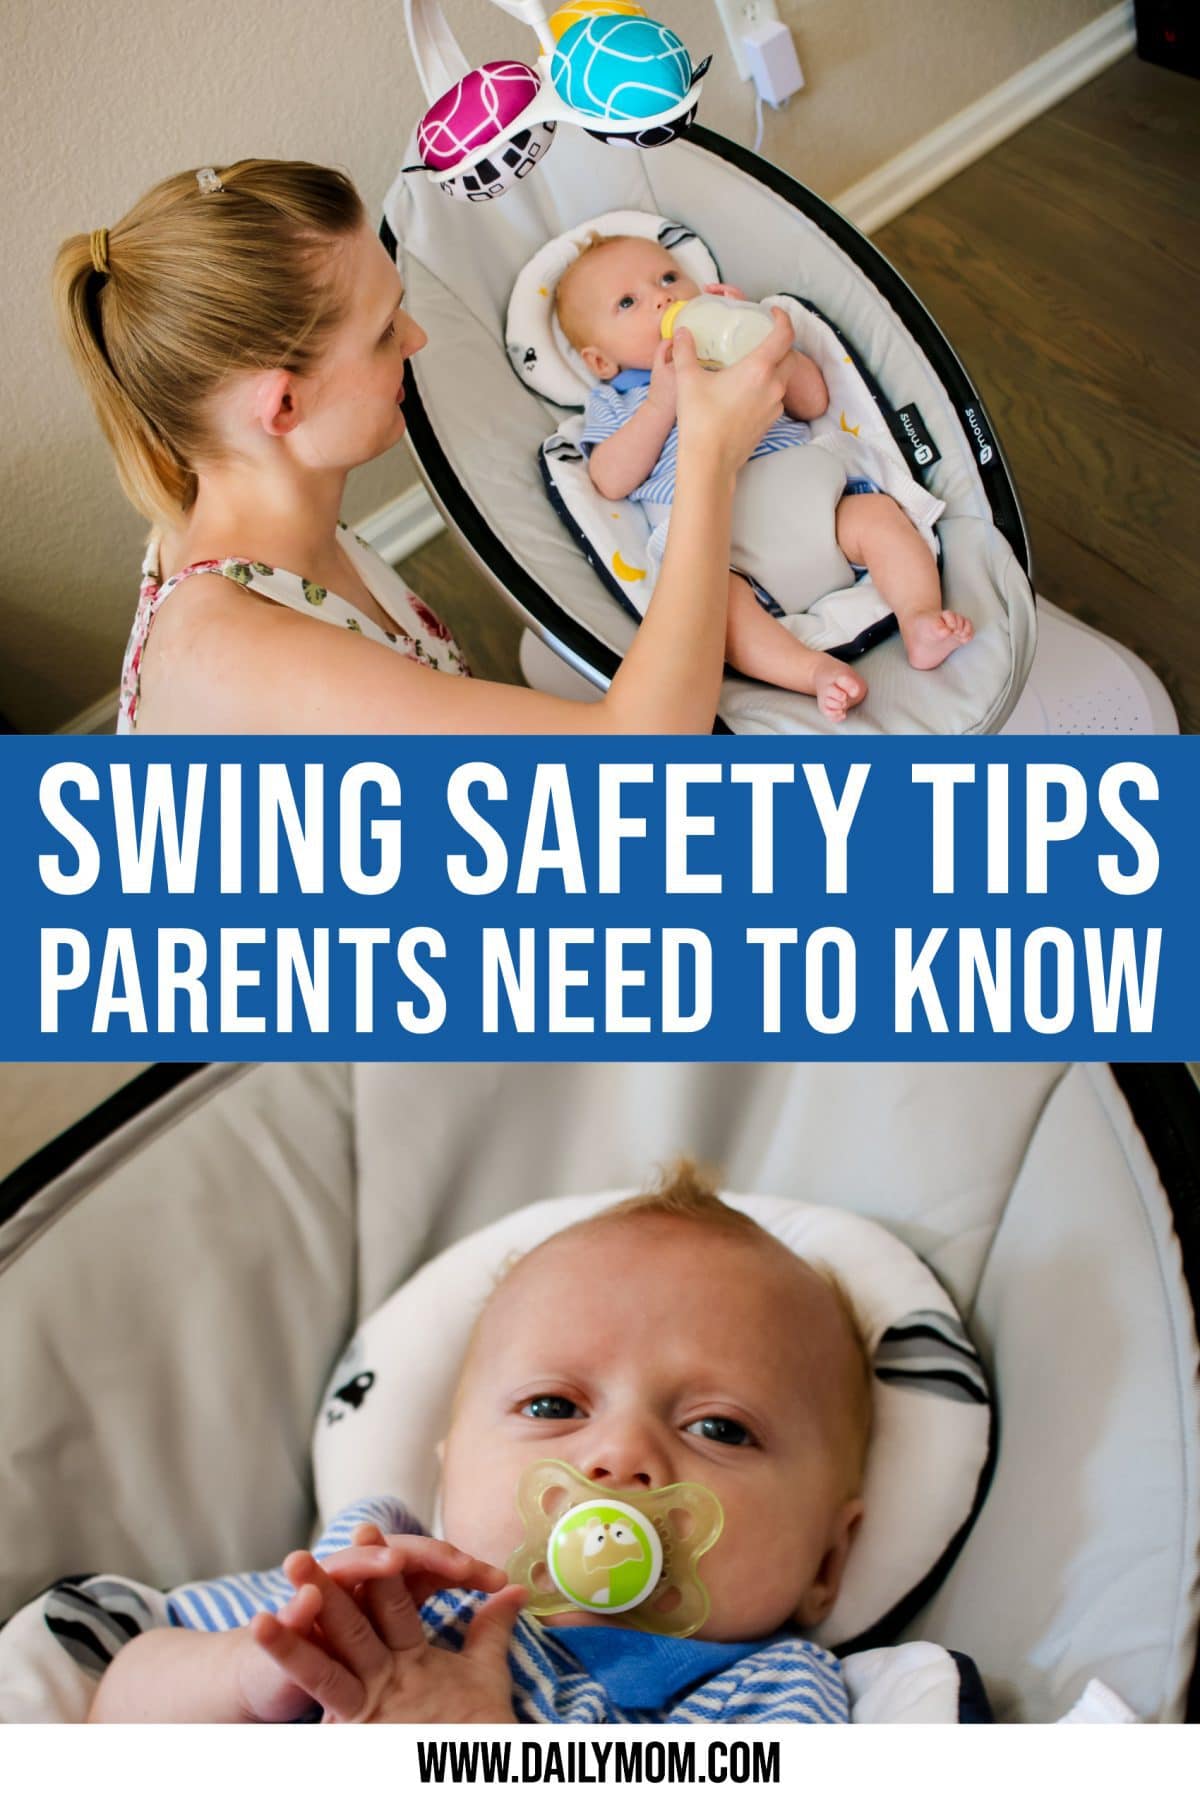 4 Out Of This World Tips For Swing Safety